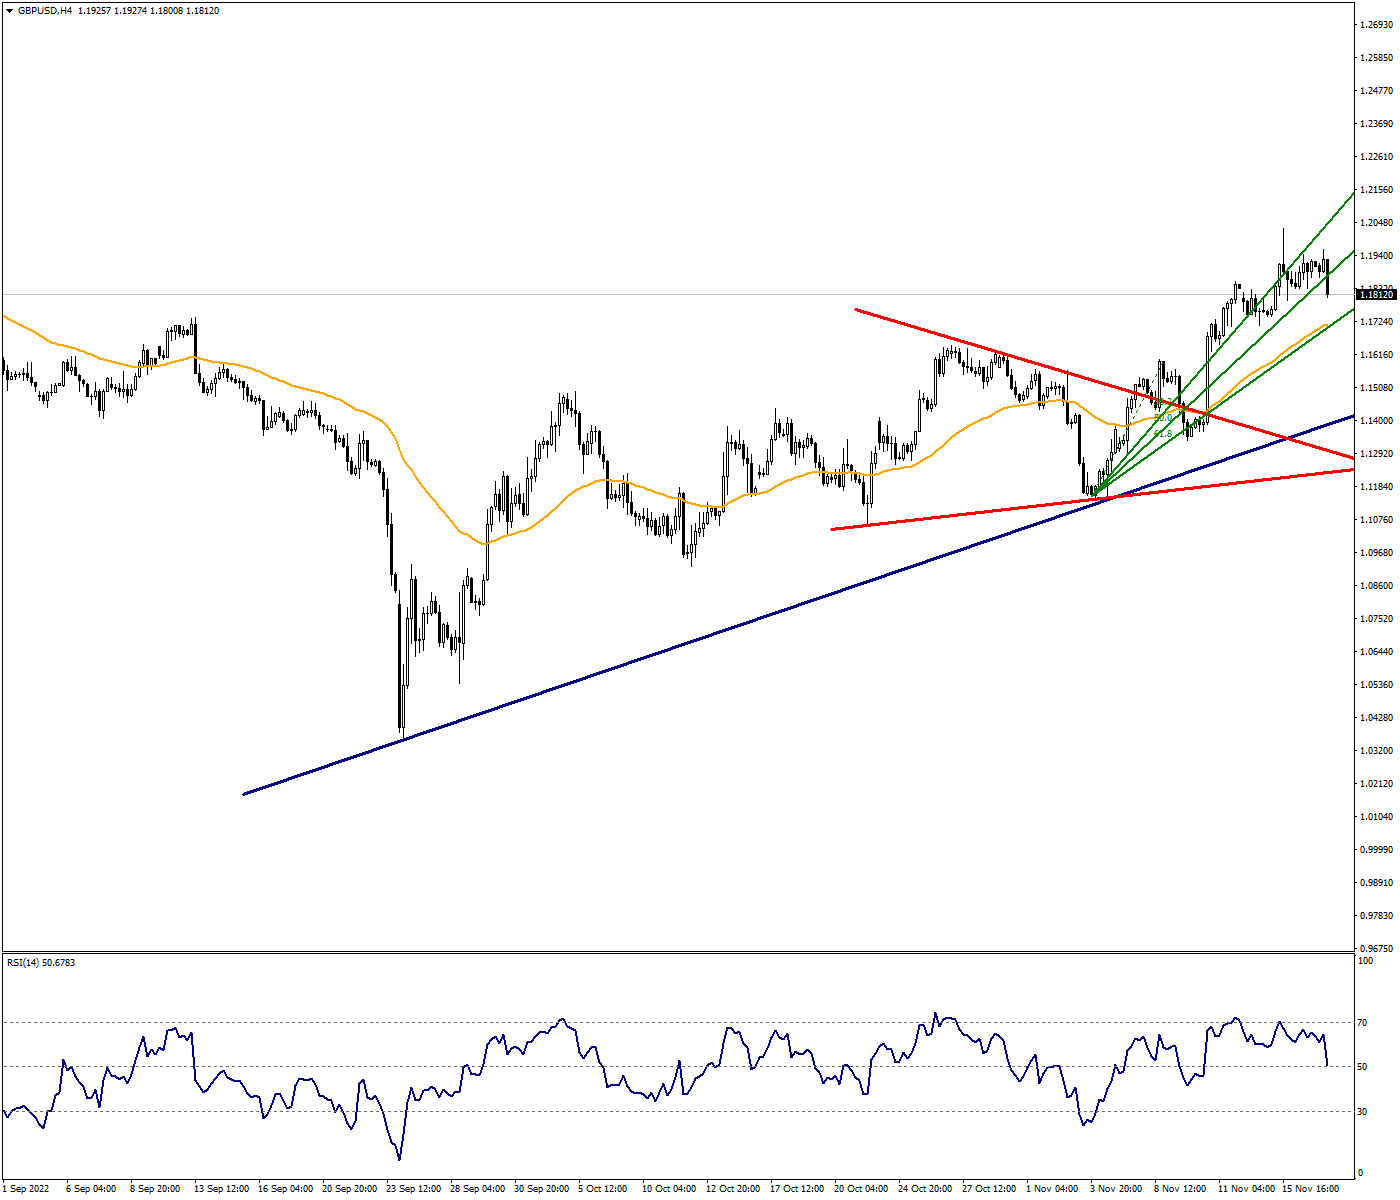 GBPUSD Decreases Its Rising Rate To The 3rd Wave